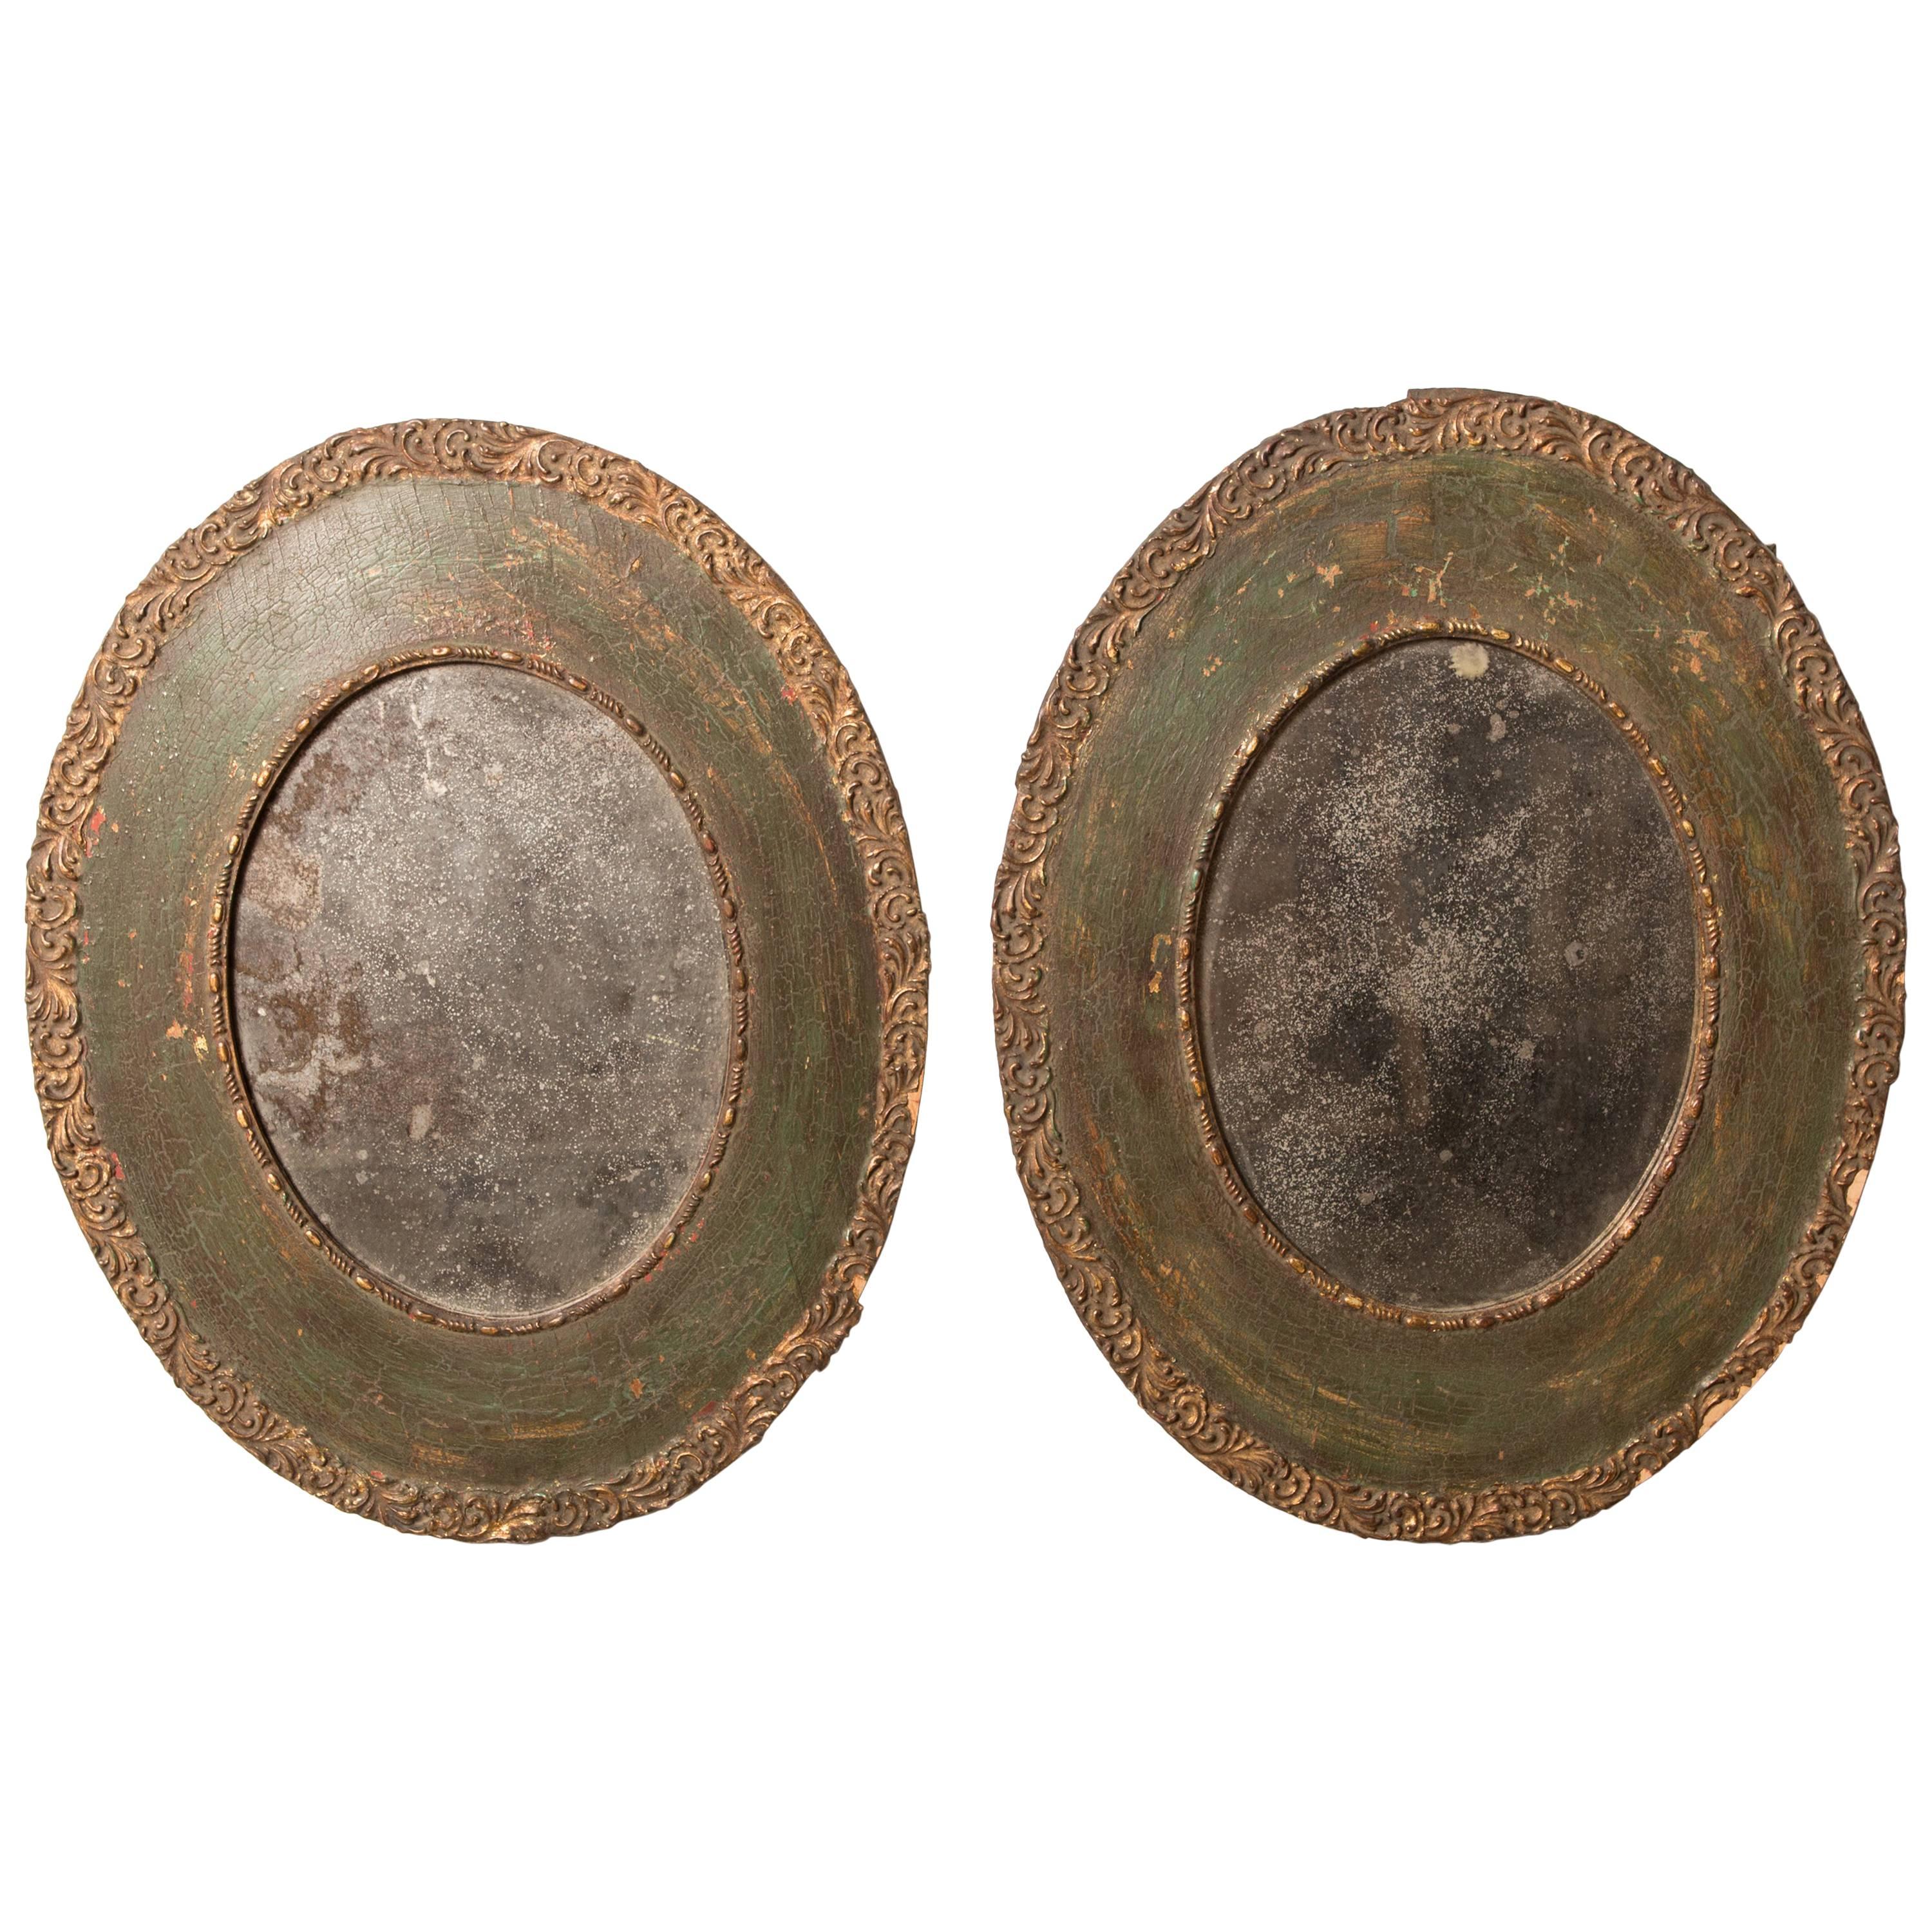 Pair of 19th-Century Antique Oval Mirrors